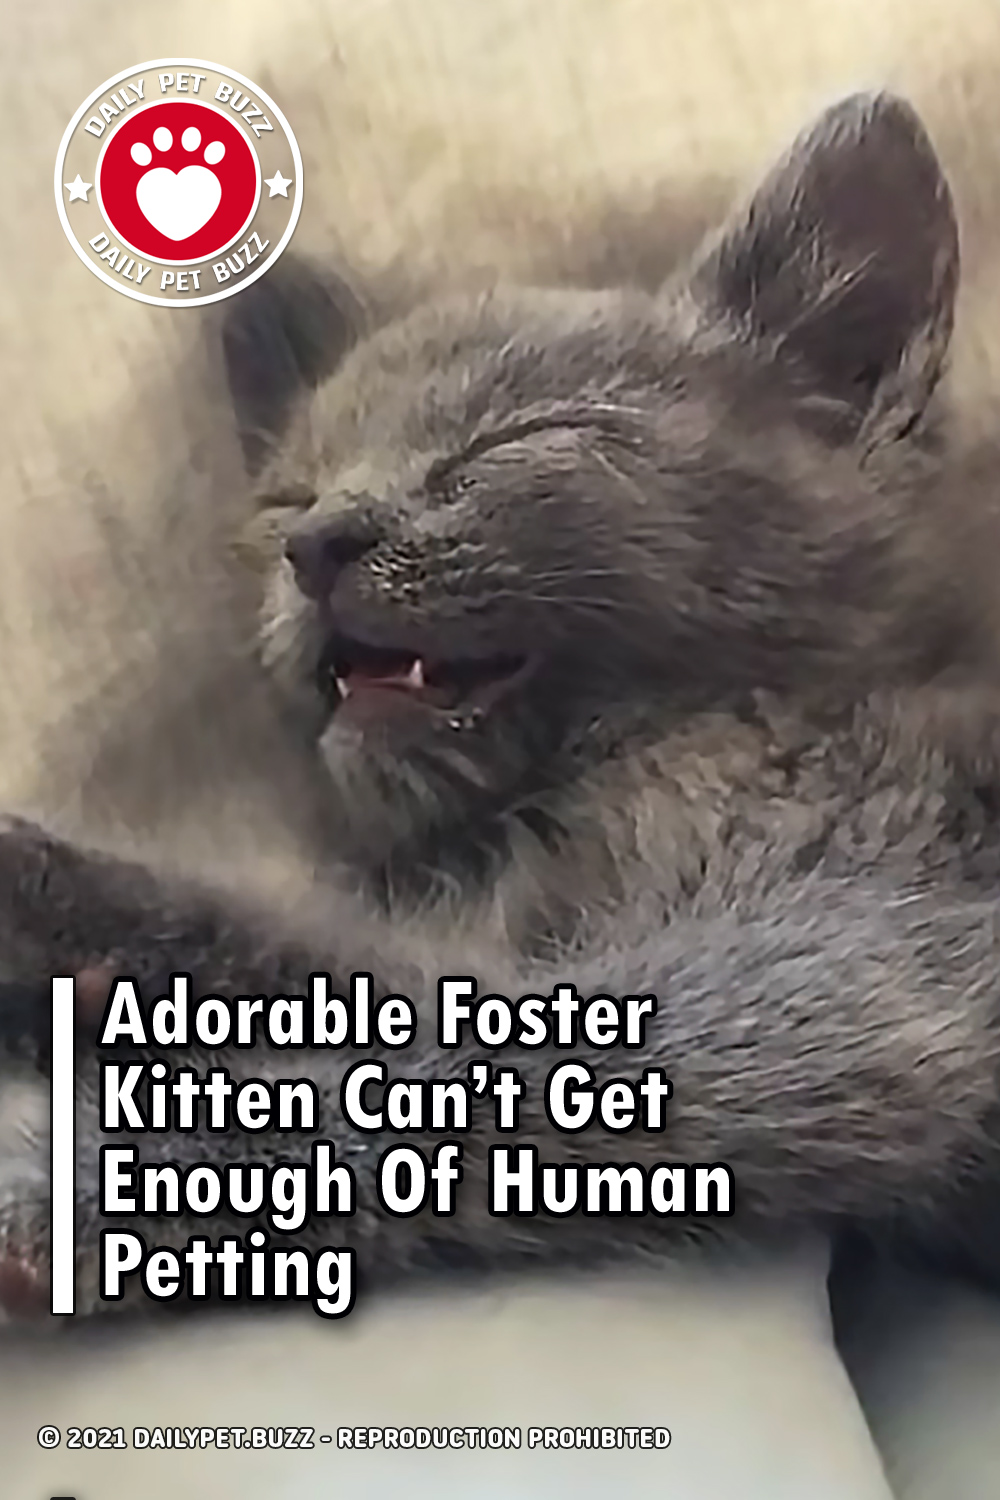 Adorable Foster Kitten Can’t Get Enough Of Human Petting